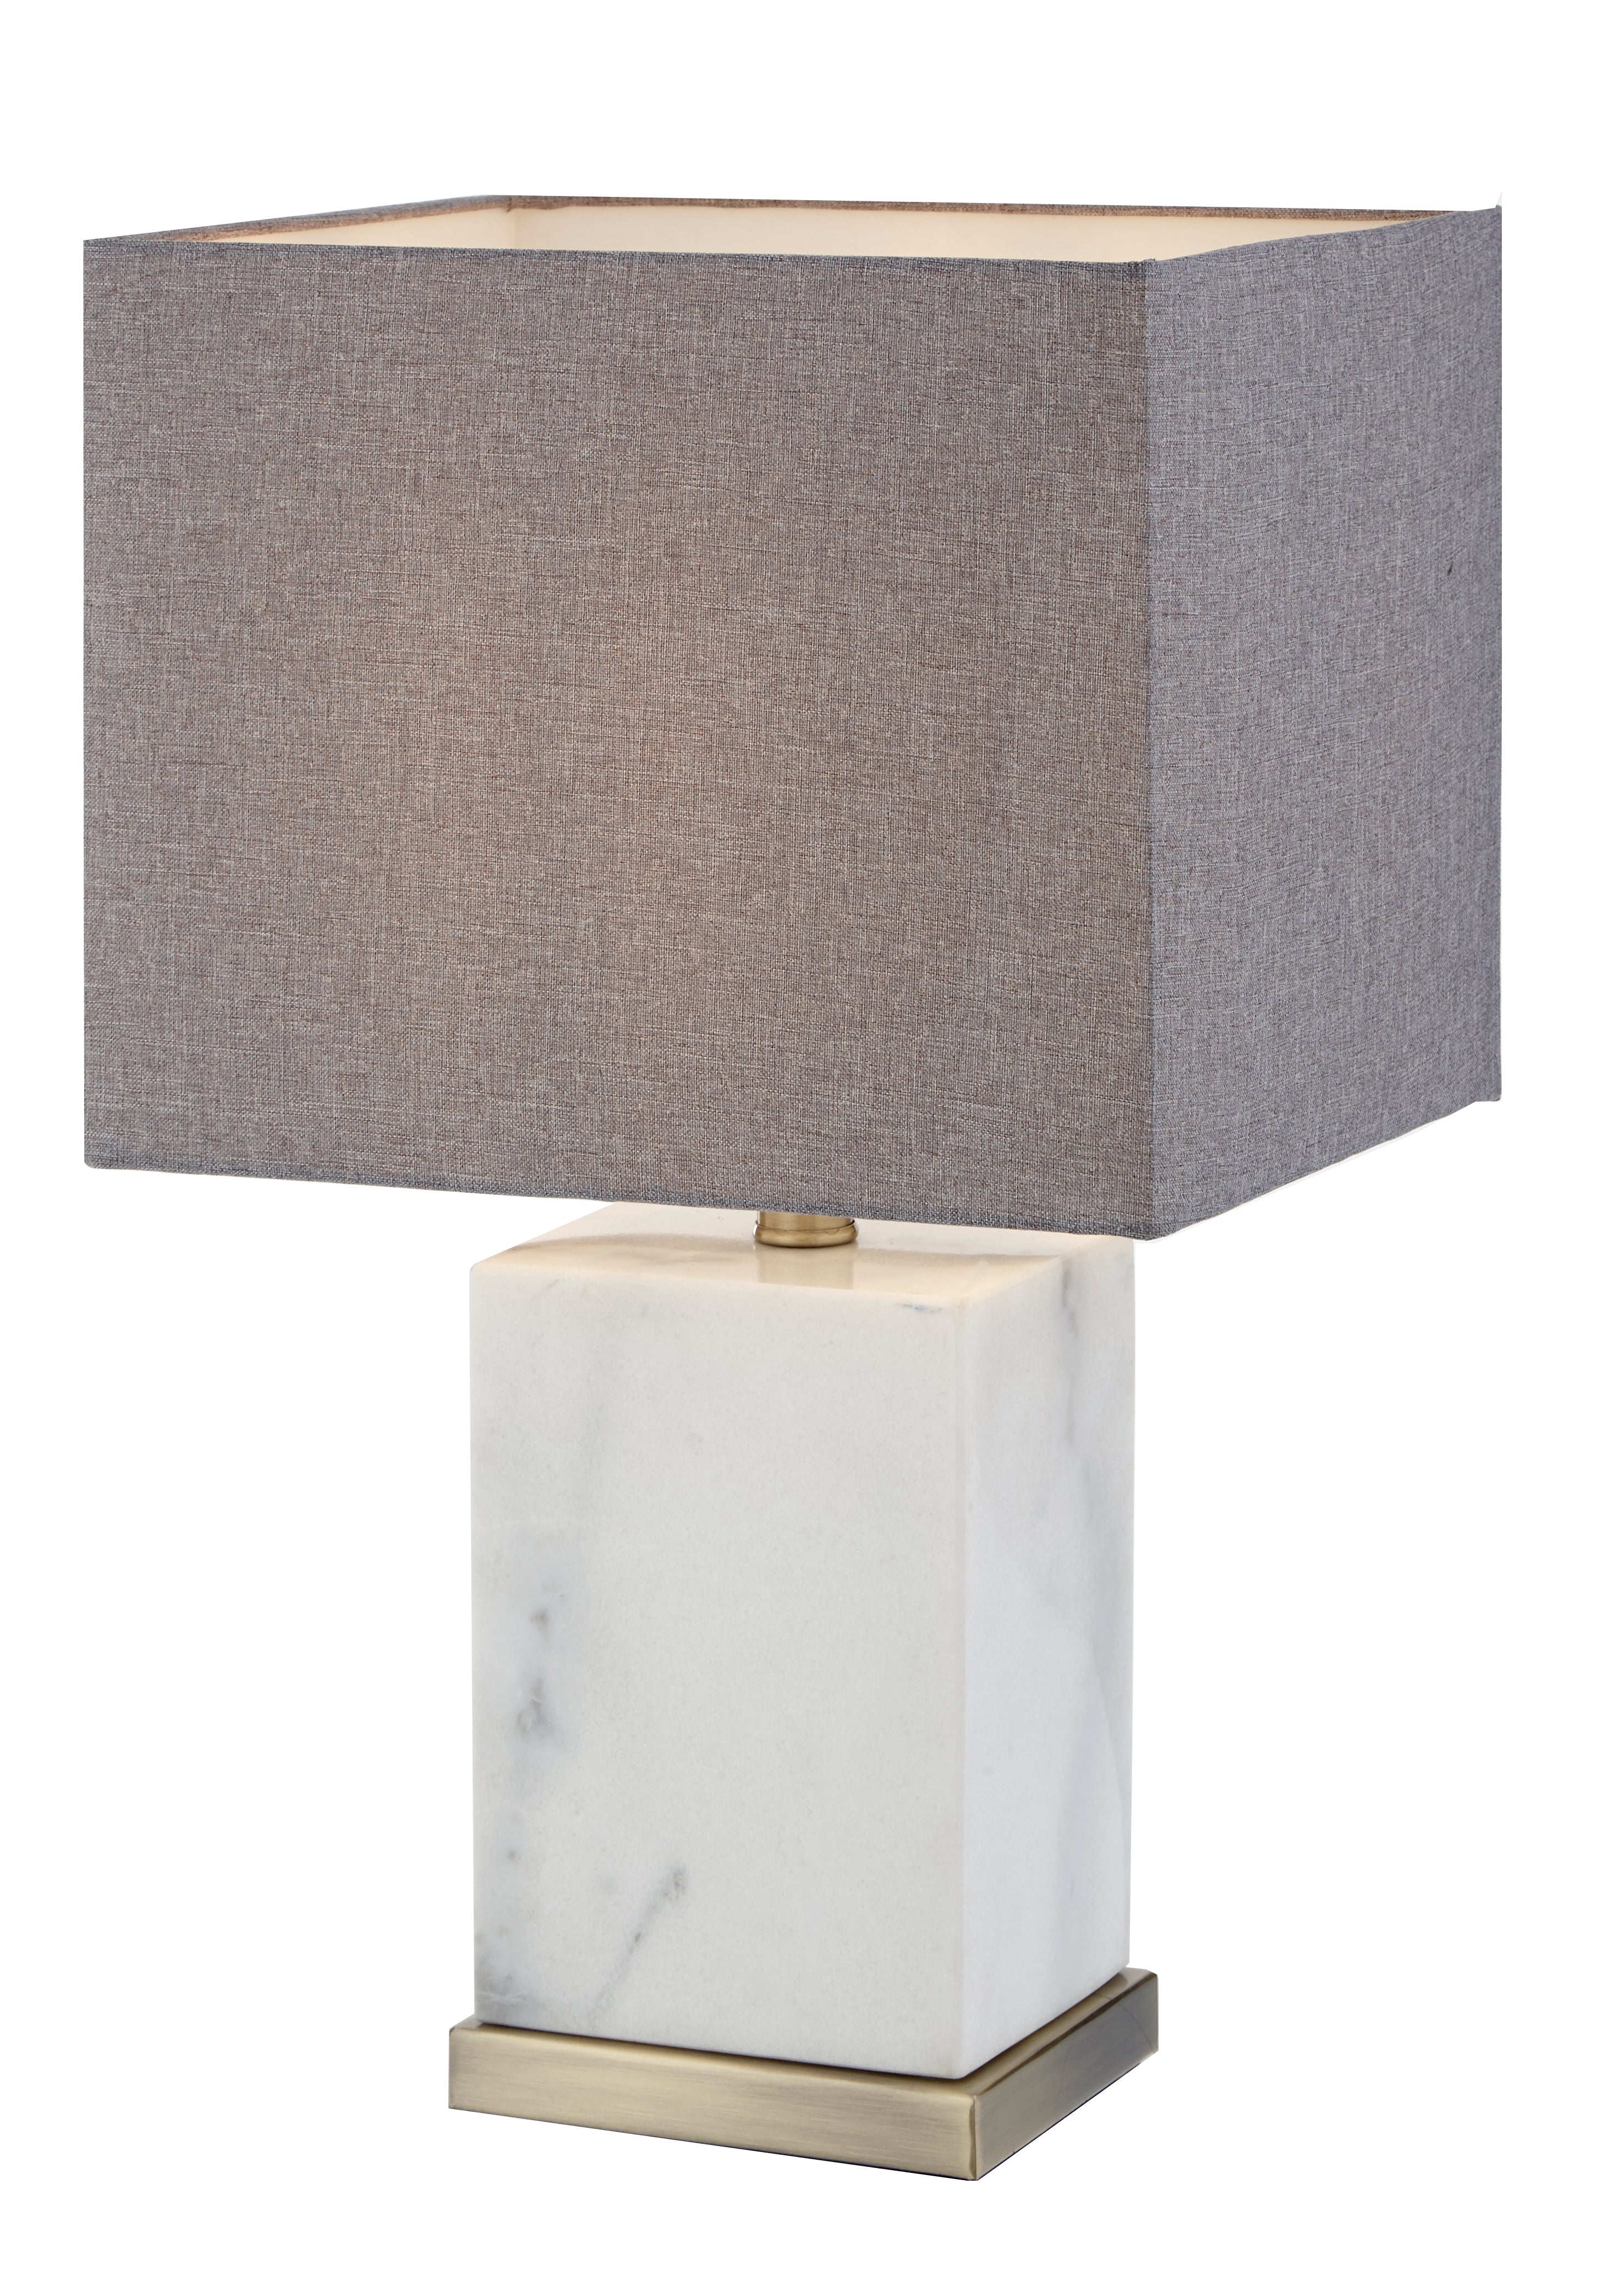 Rv Astley Abella Table Lamp Marble And Antique Brass Outlet